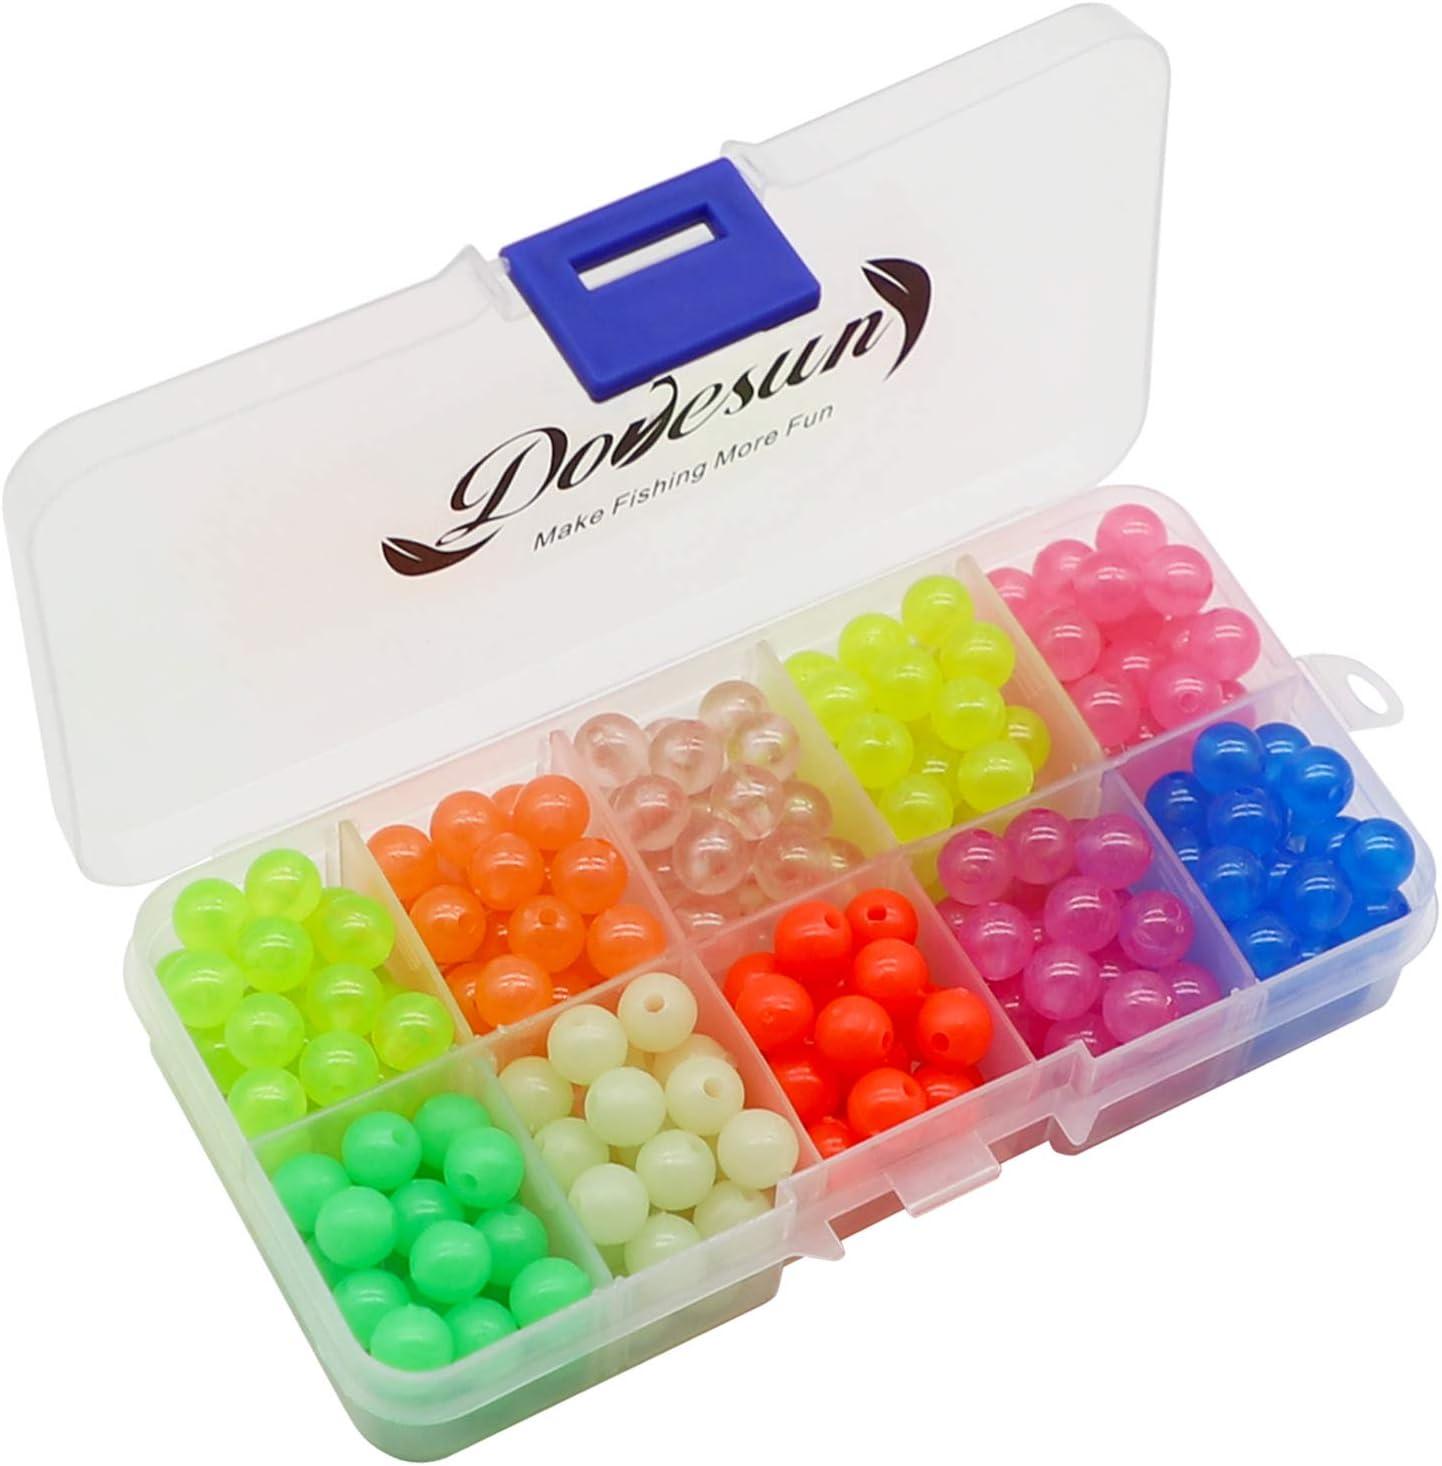 Dovesun Fishing Beads Assorted Beads Fishing Bait Eggs Glow in  Dark/Laser/Colorful/Four Types 0.2in(1000pcs), 0.24in(600pcs),  0.32in(250pcs), 0.39in(120pcs) A-Glow in Dark-0.31in*250pcs